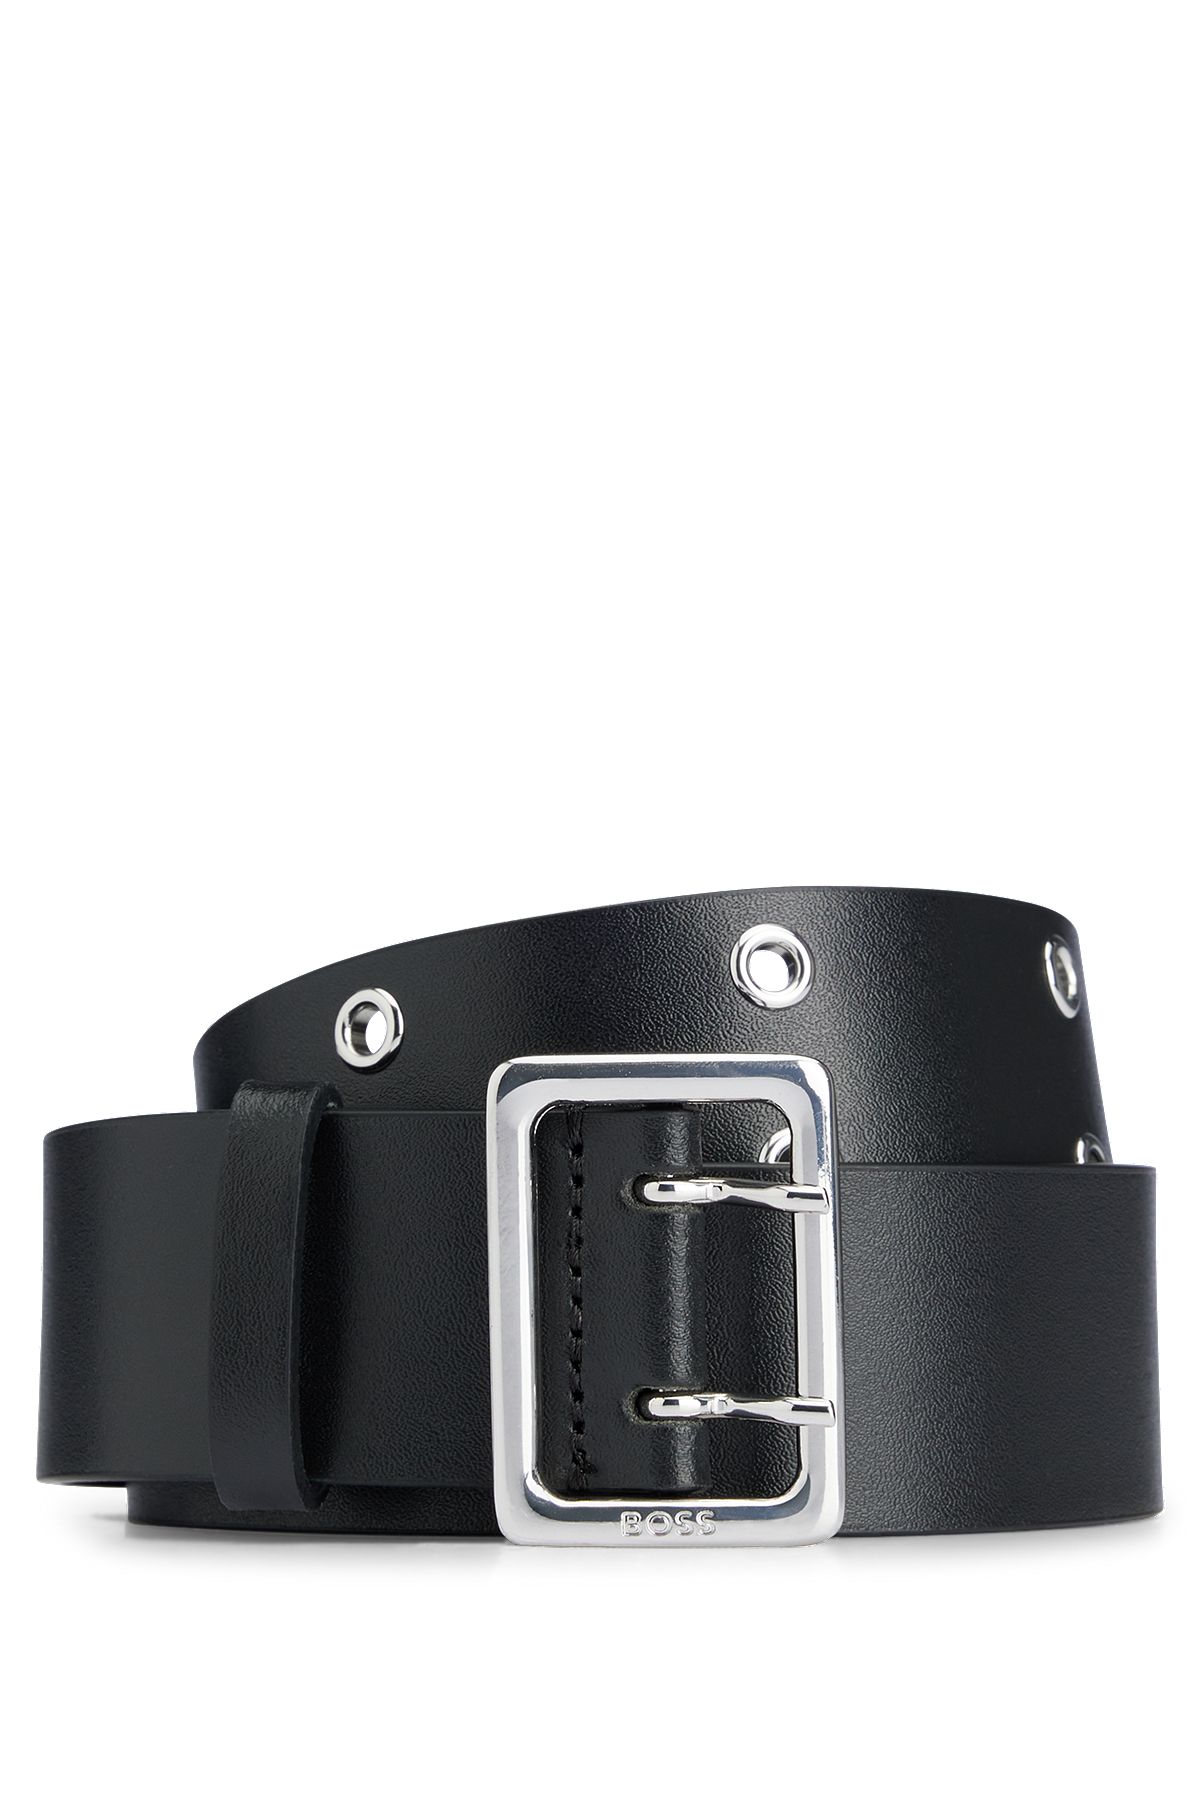 Pin-buckle belt in Italian leather with metal eyelets, Black